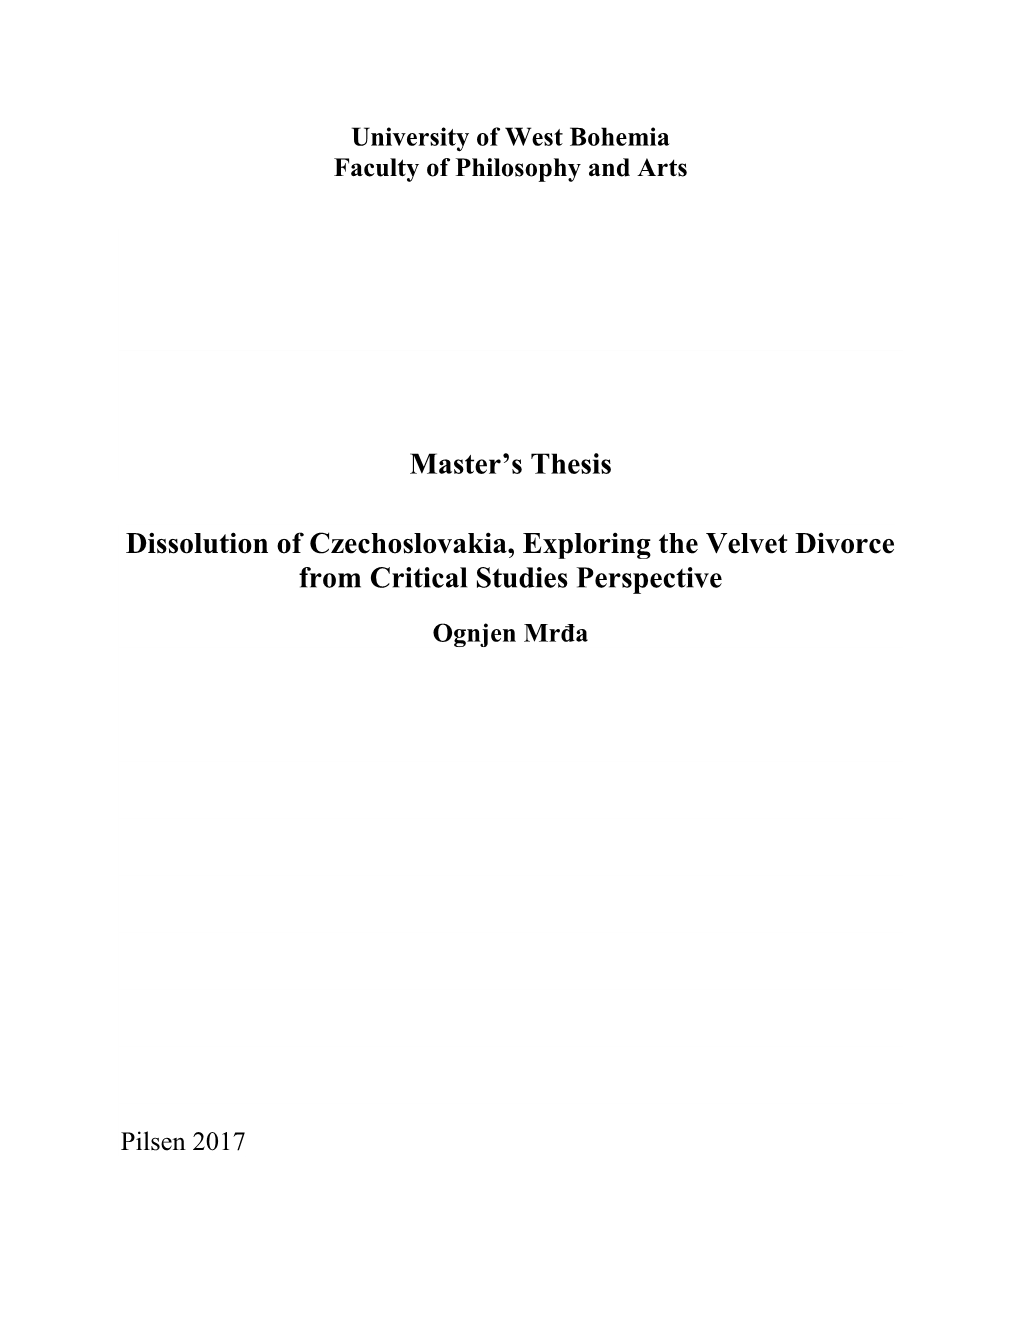 Master's Thesis Dissolution of Czechoslovakia, Exploring The